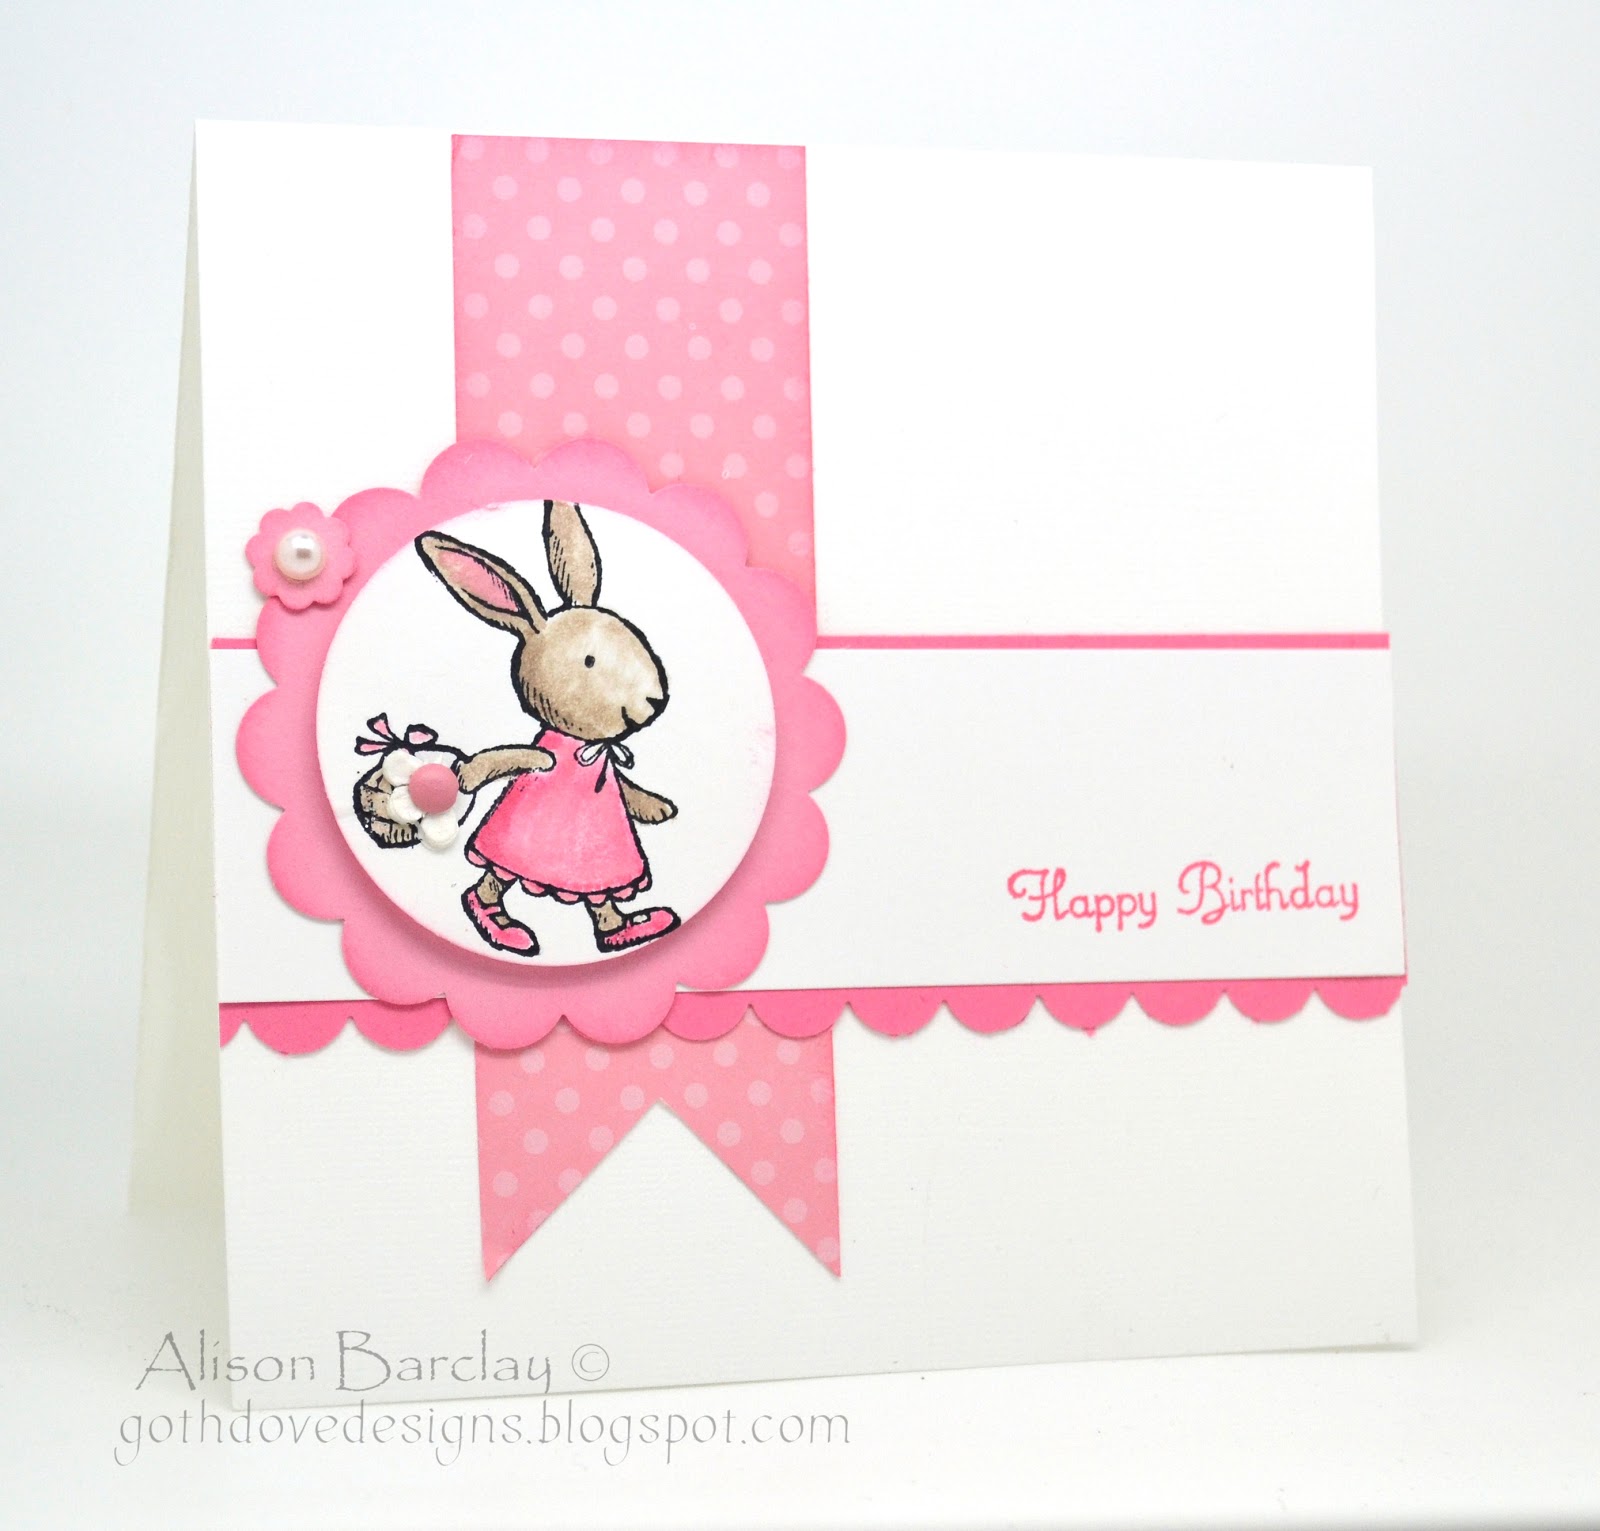 Gothdove Designs - Stampin' Up! ® Australia : Stampin' Up! Everybunny ...